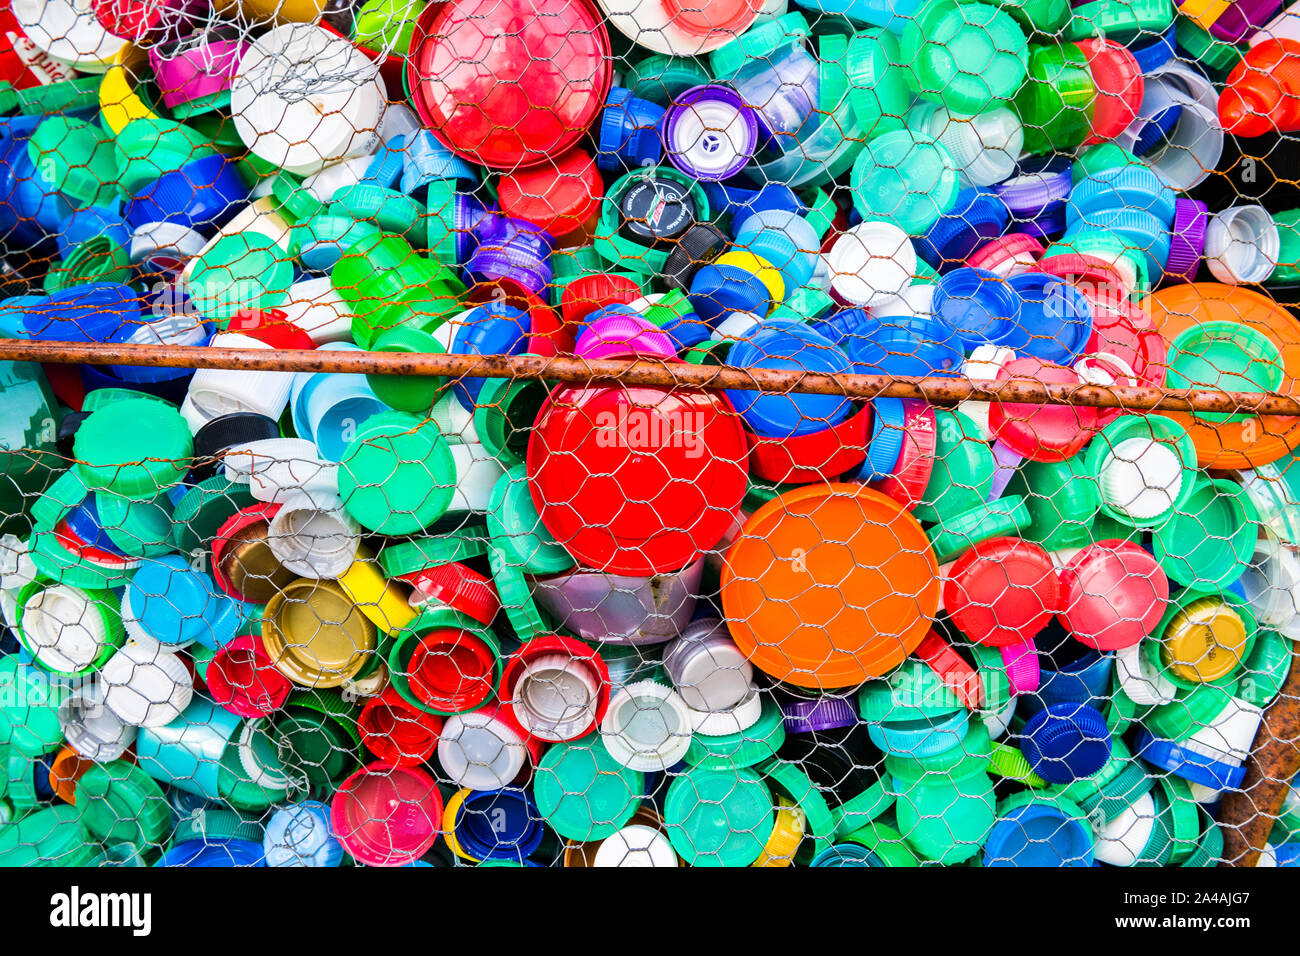 Large colection of coloured plastic bottle tops forming a wired sculpture. Stock Photo